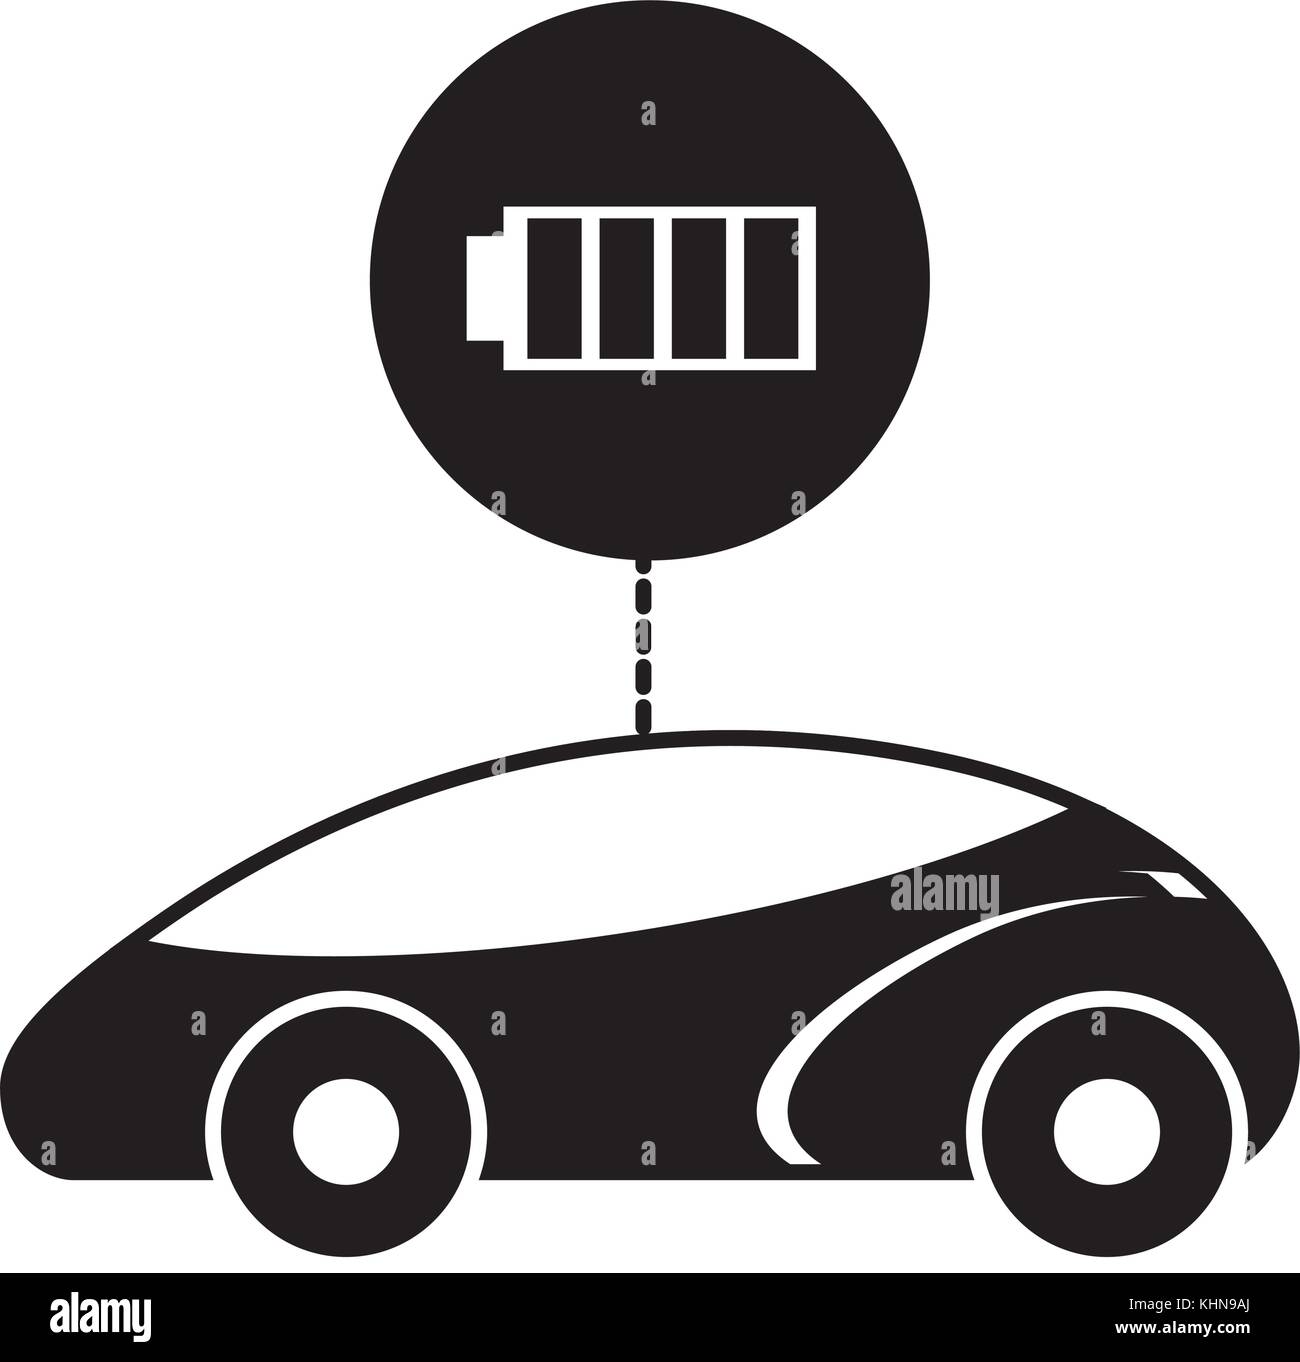 smart or intelligent car battery charger technology Stock Vector